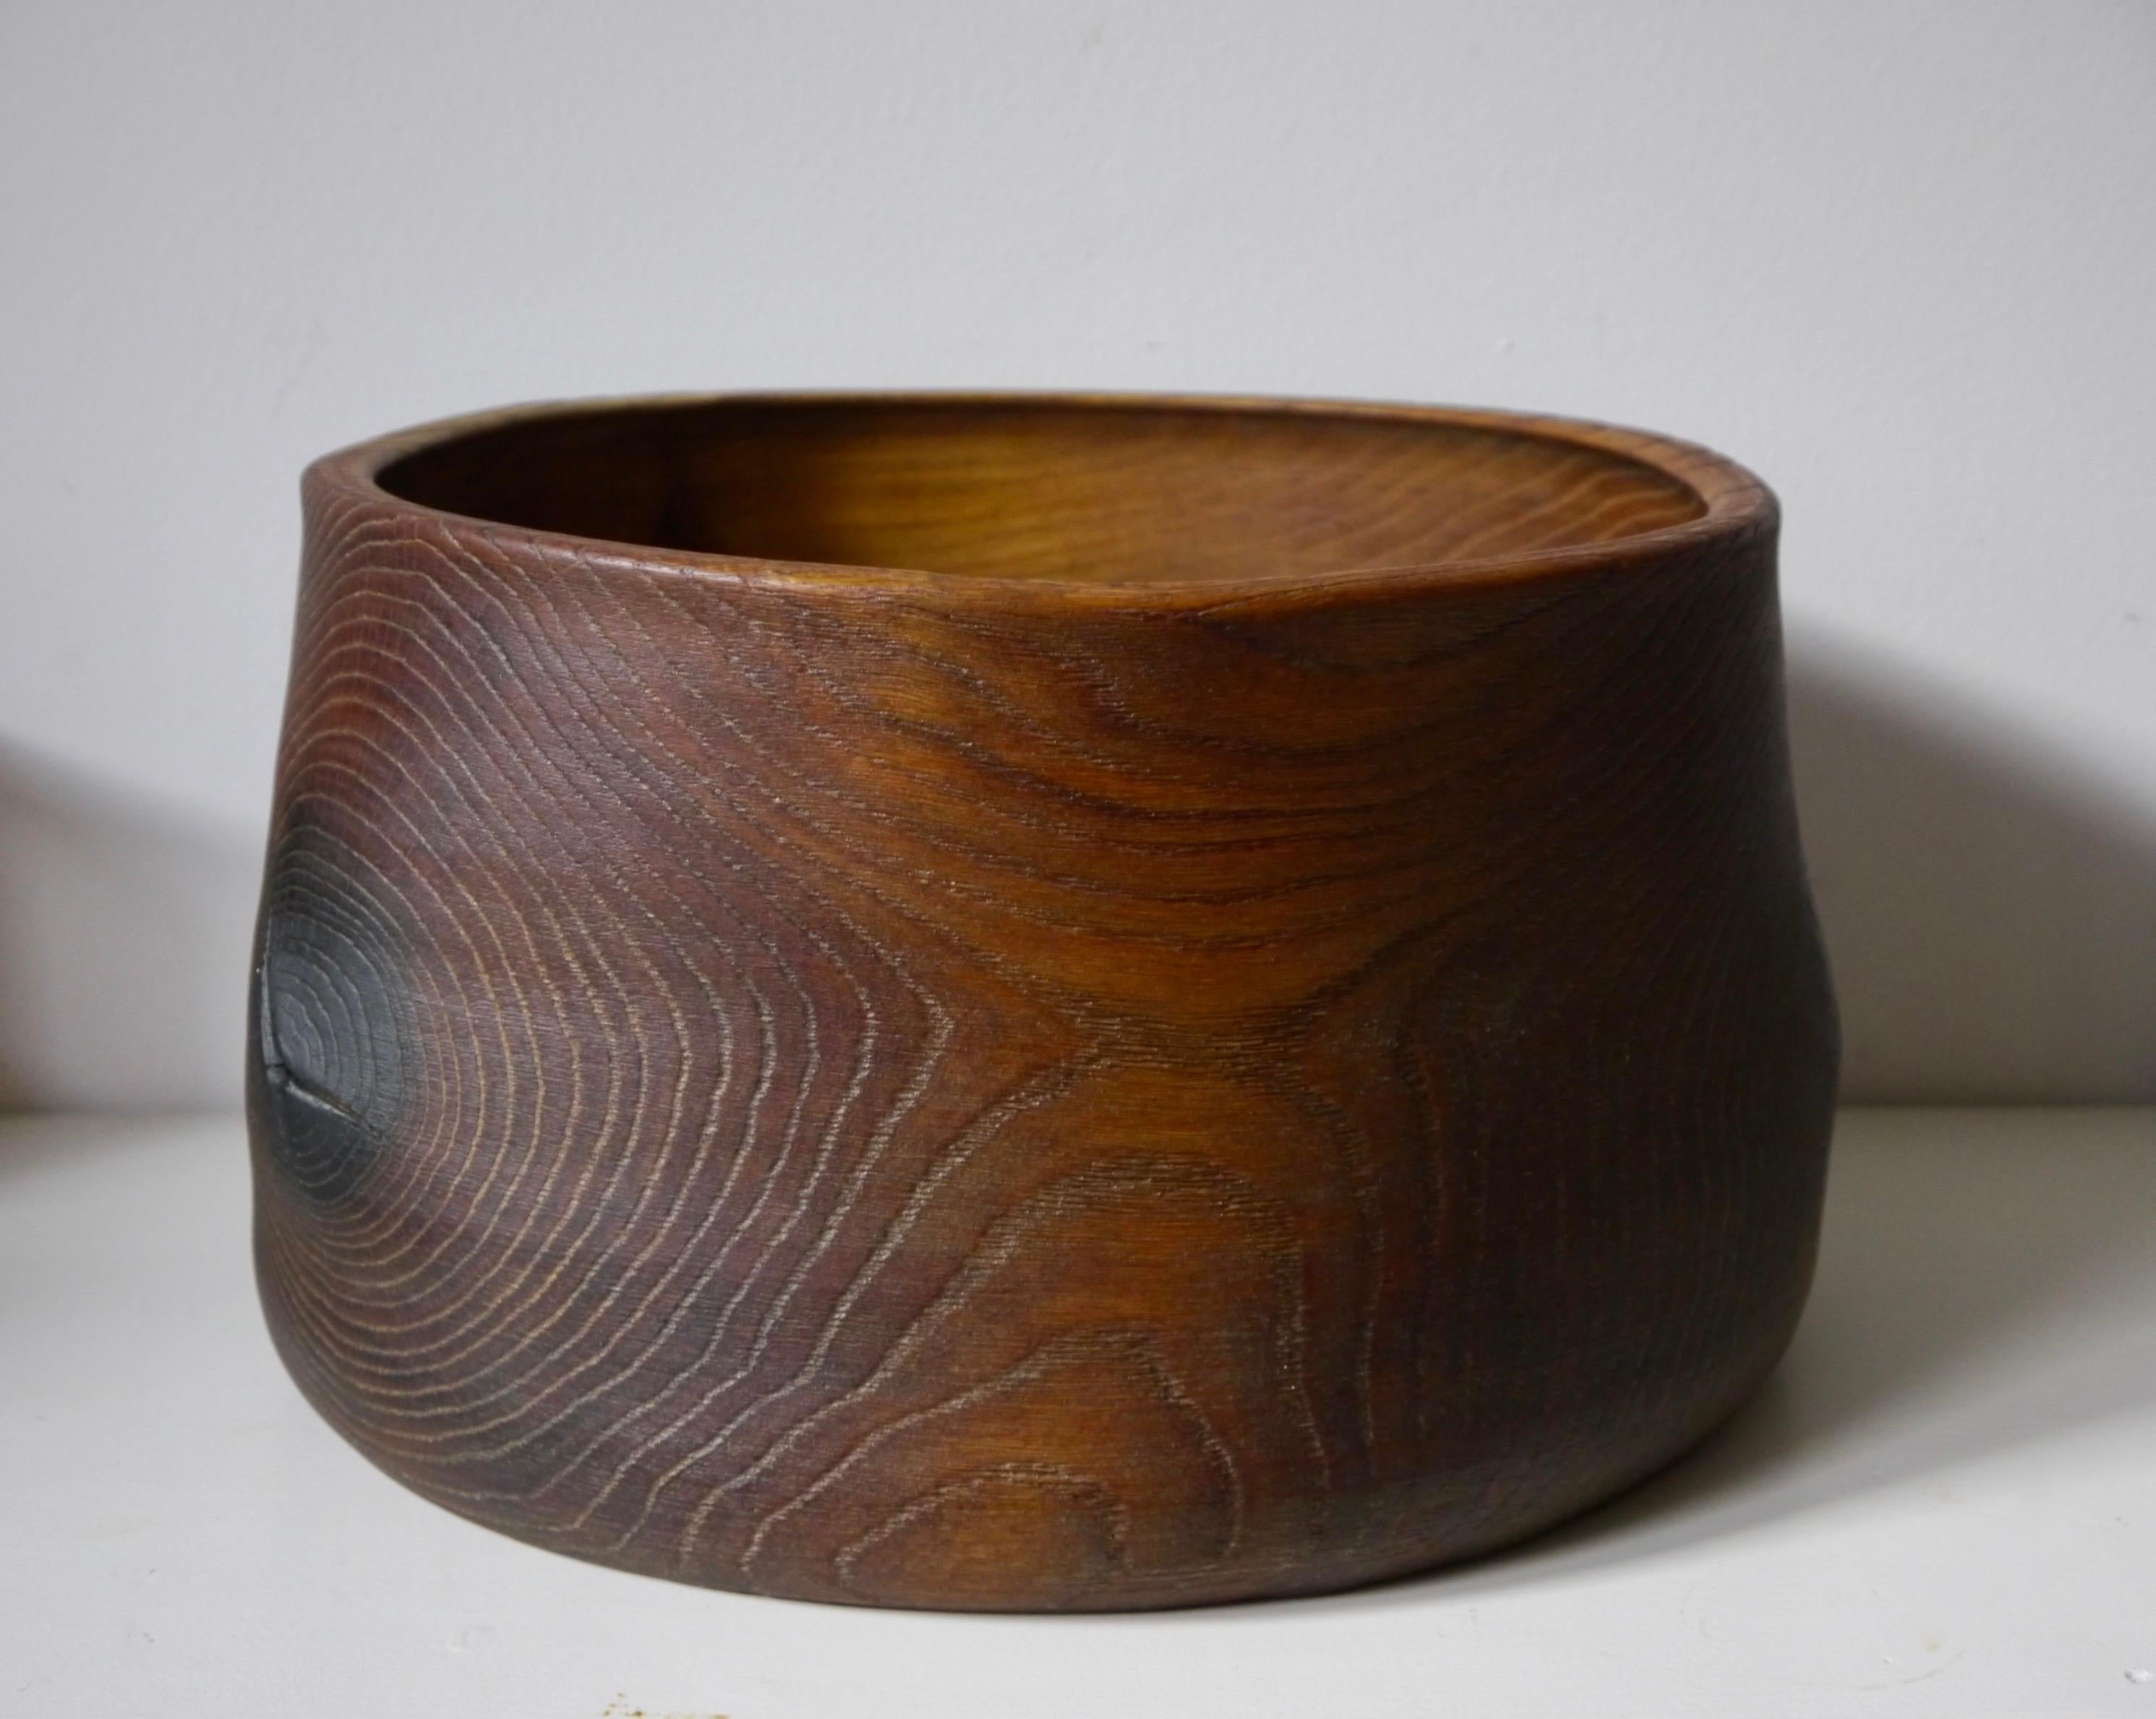 Limed oak bowl by Fritz Baumann
Dimensions: ø 35 x H 21 cm
Materials: Oak

handmade from solid pieces of wood, free-cut following the natural grain, made one by one, the stools of Fritz Baumann are the kind of objects that remind us of the sheer